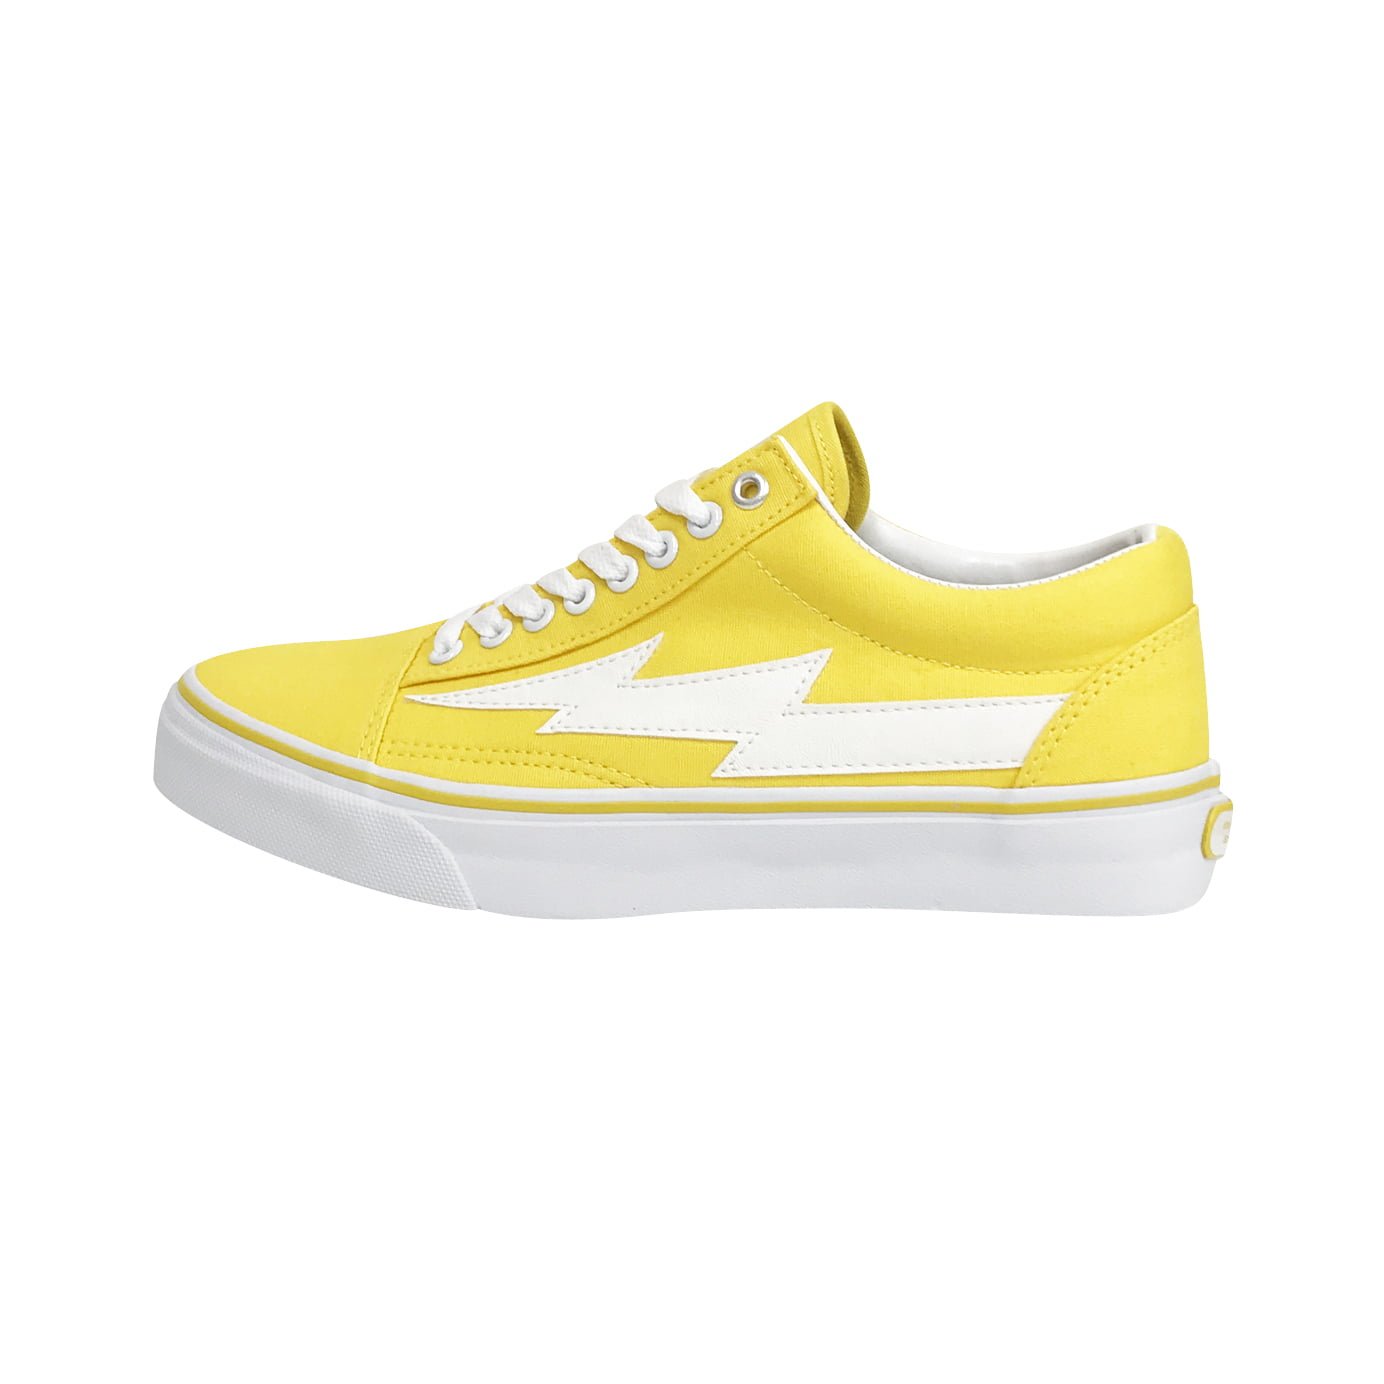 OLD CLASSIC YELLOW ALL CANVAS - REVENGE 